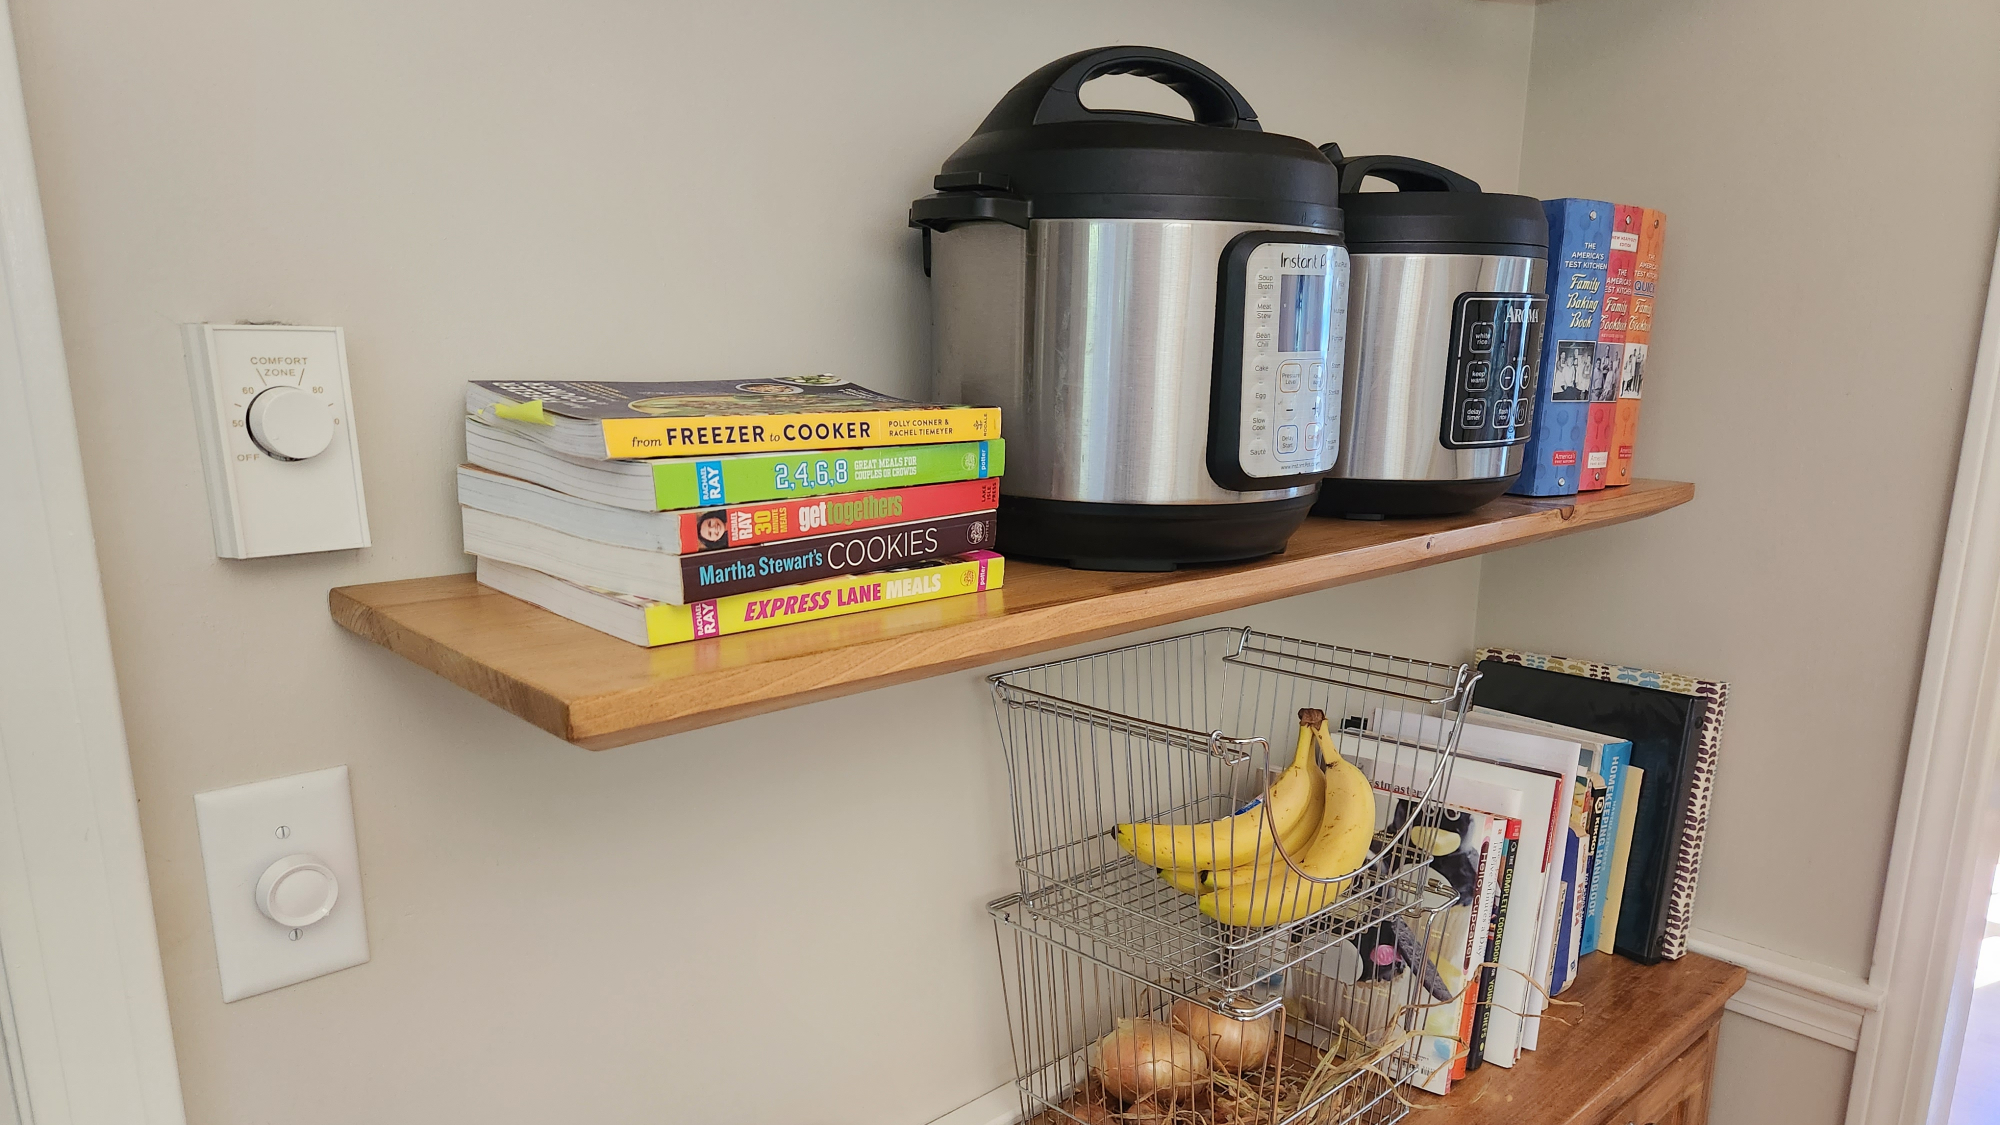 A DIY floating shelf in a home with an Instant Pot and some books on it.